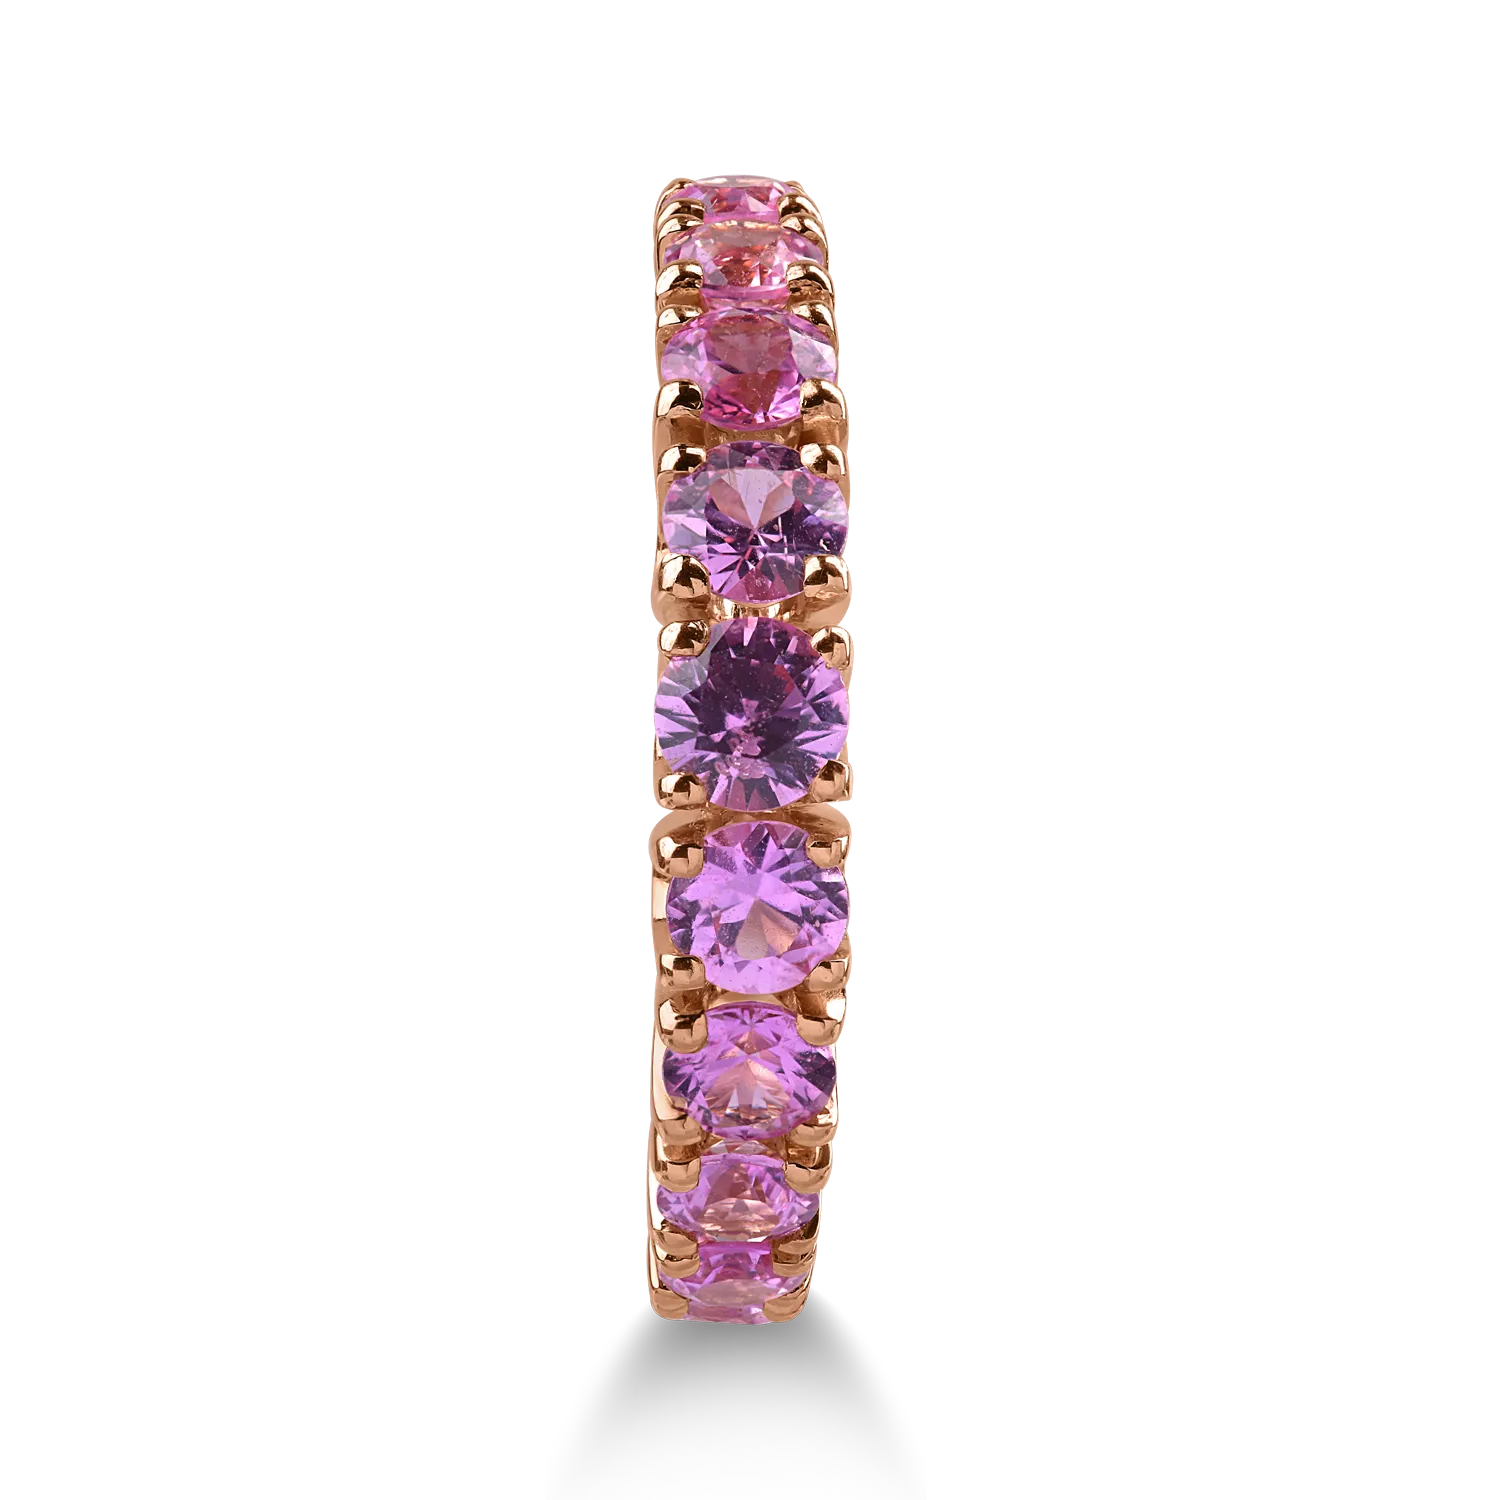 Half eternity ring in rose gold with 1.97ct pink sapphire